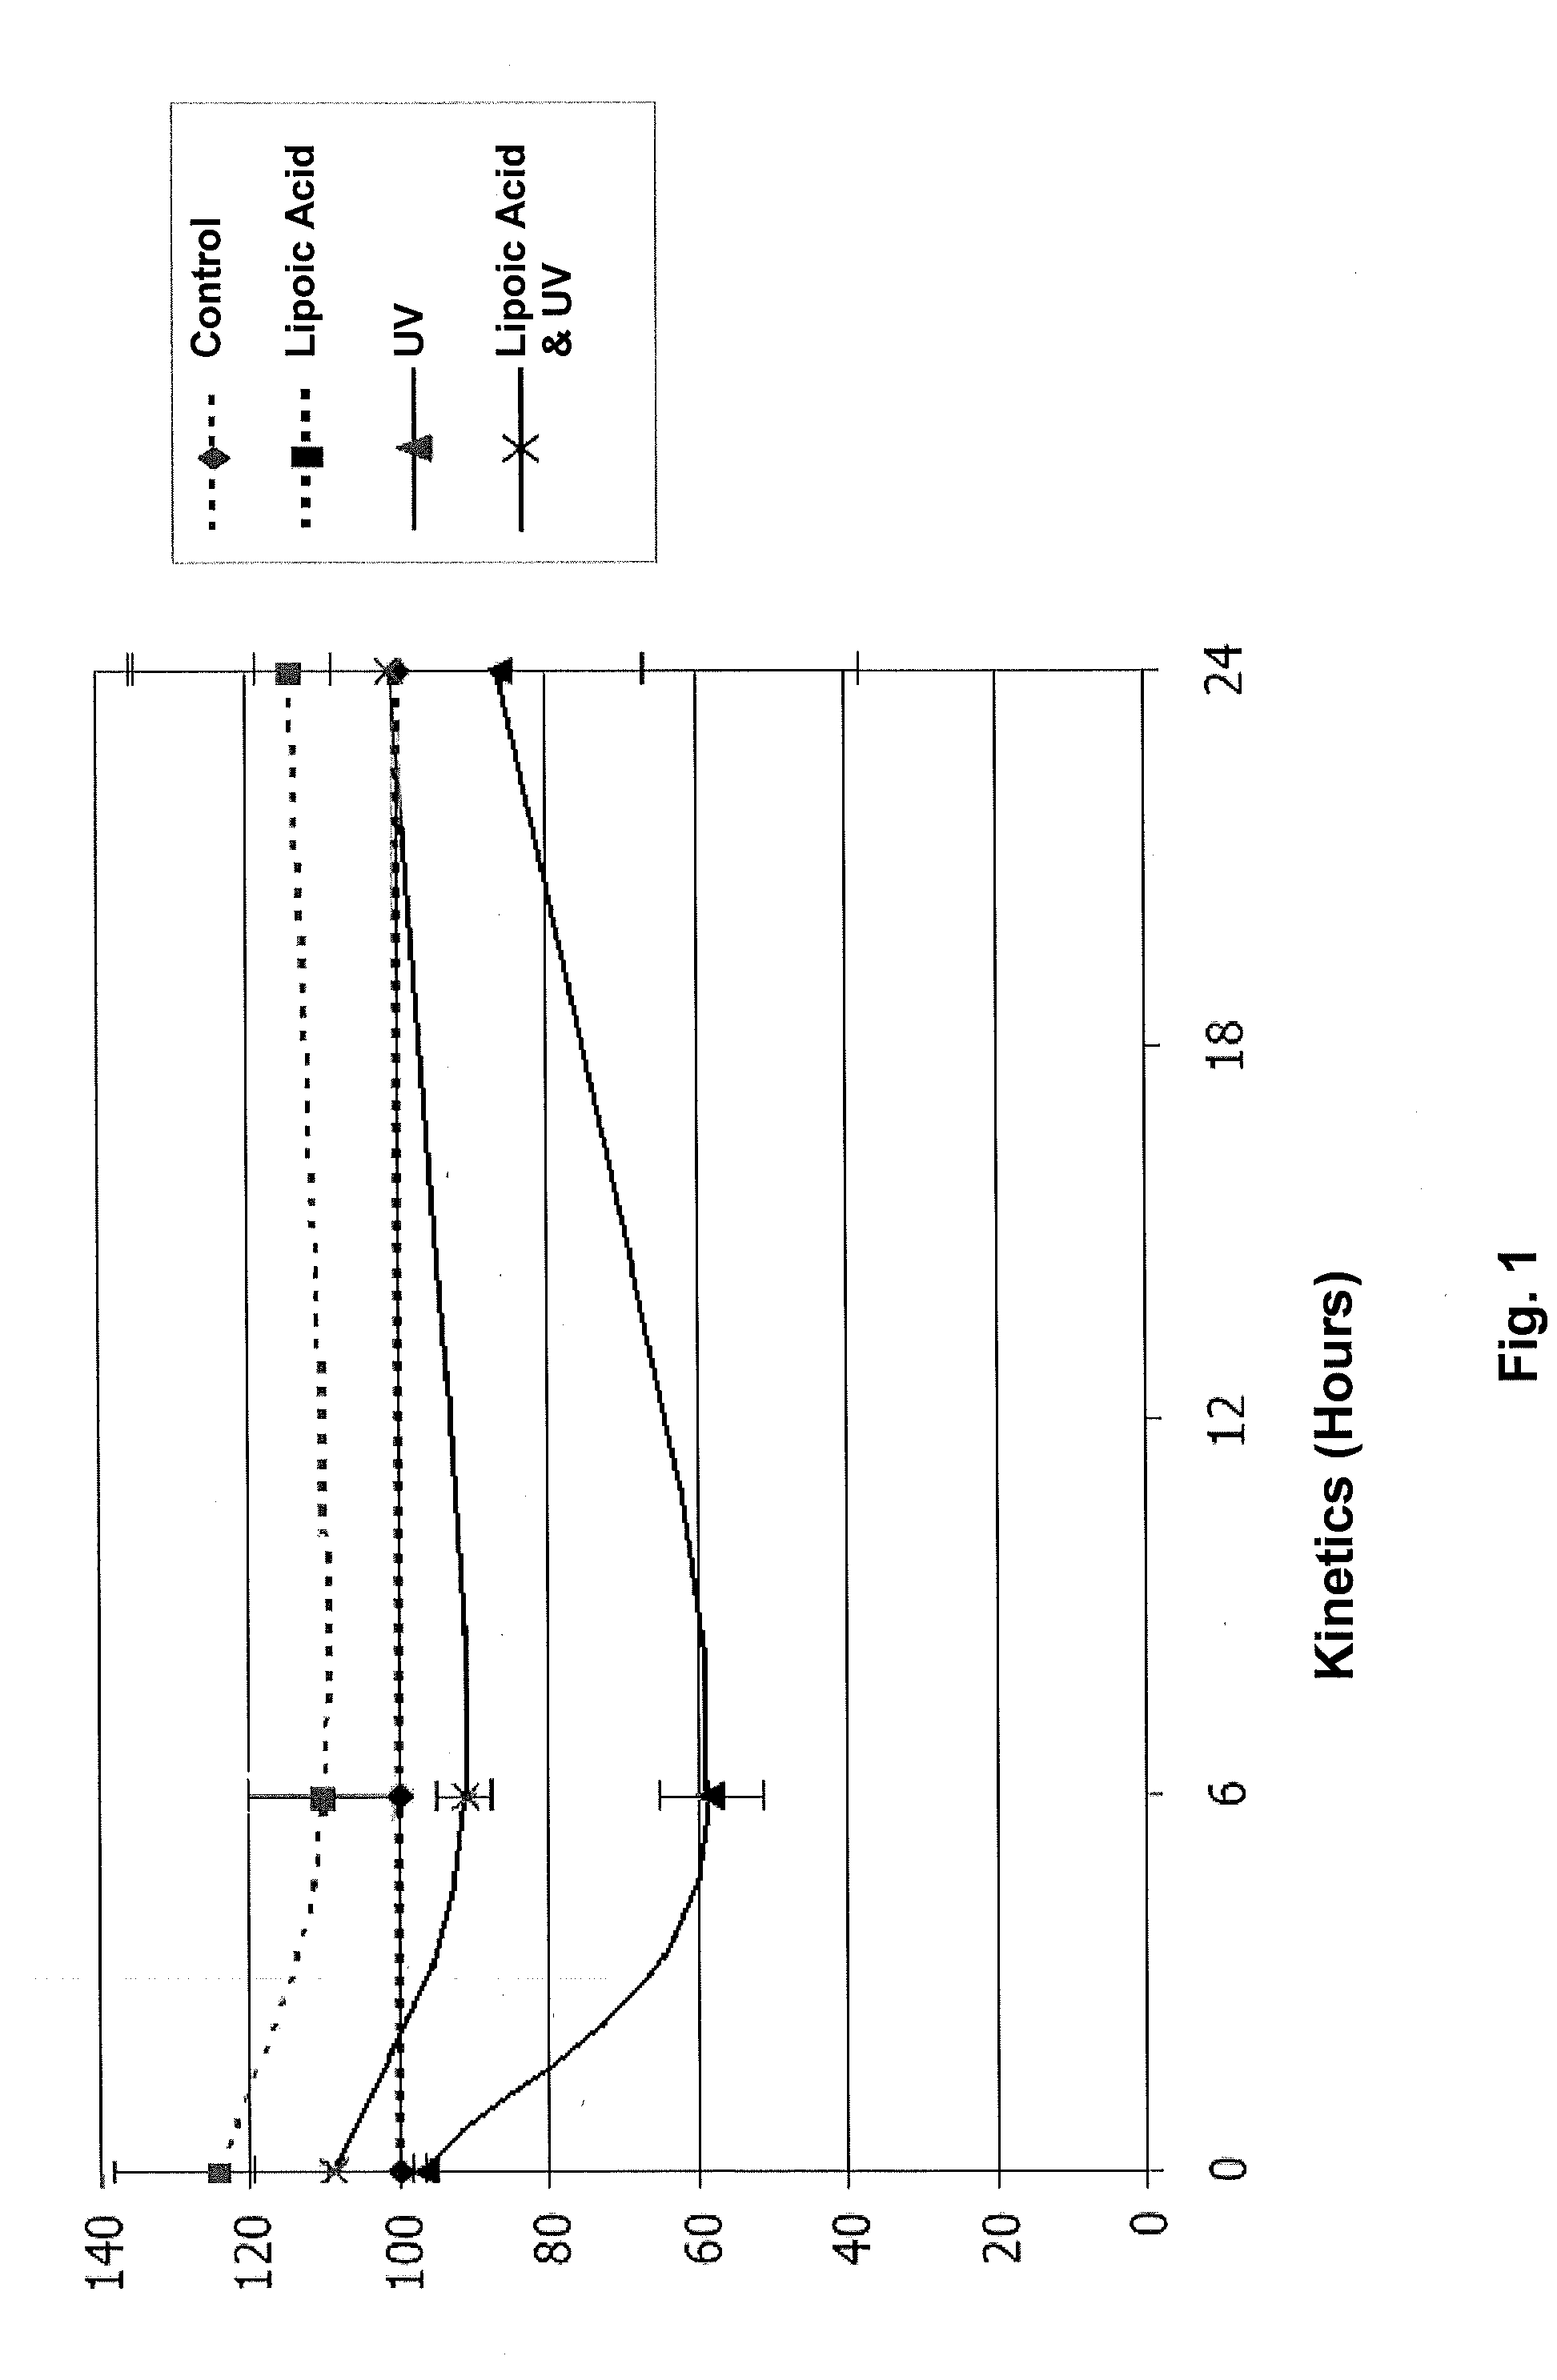 Administration of dithiolane compounds for photoprotecting the skin